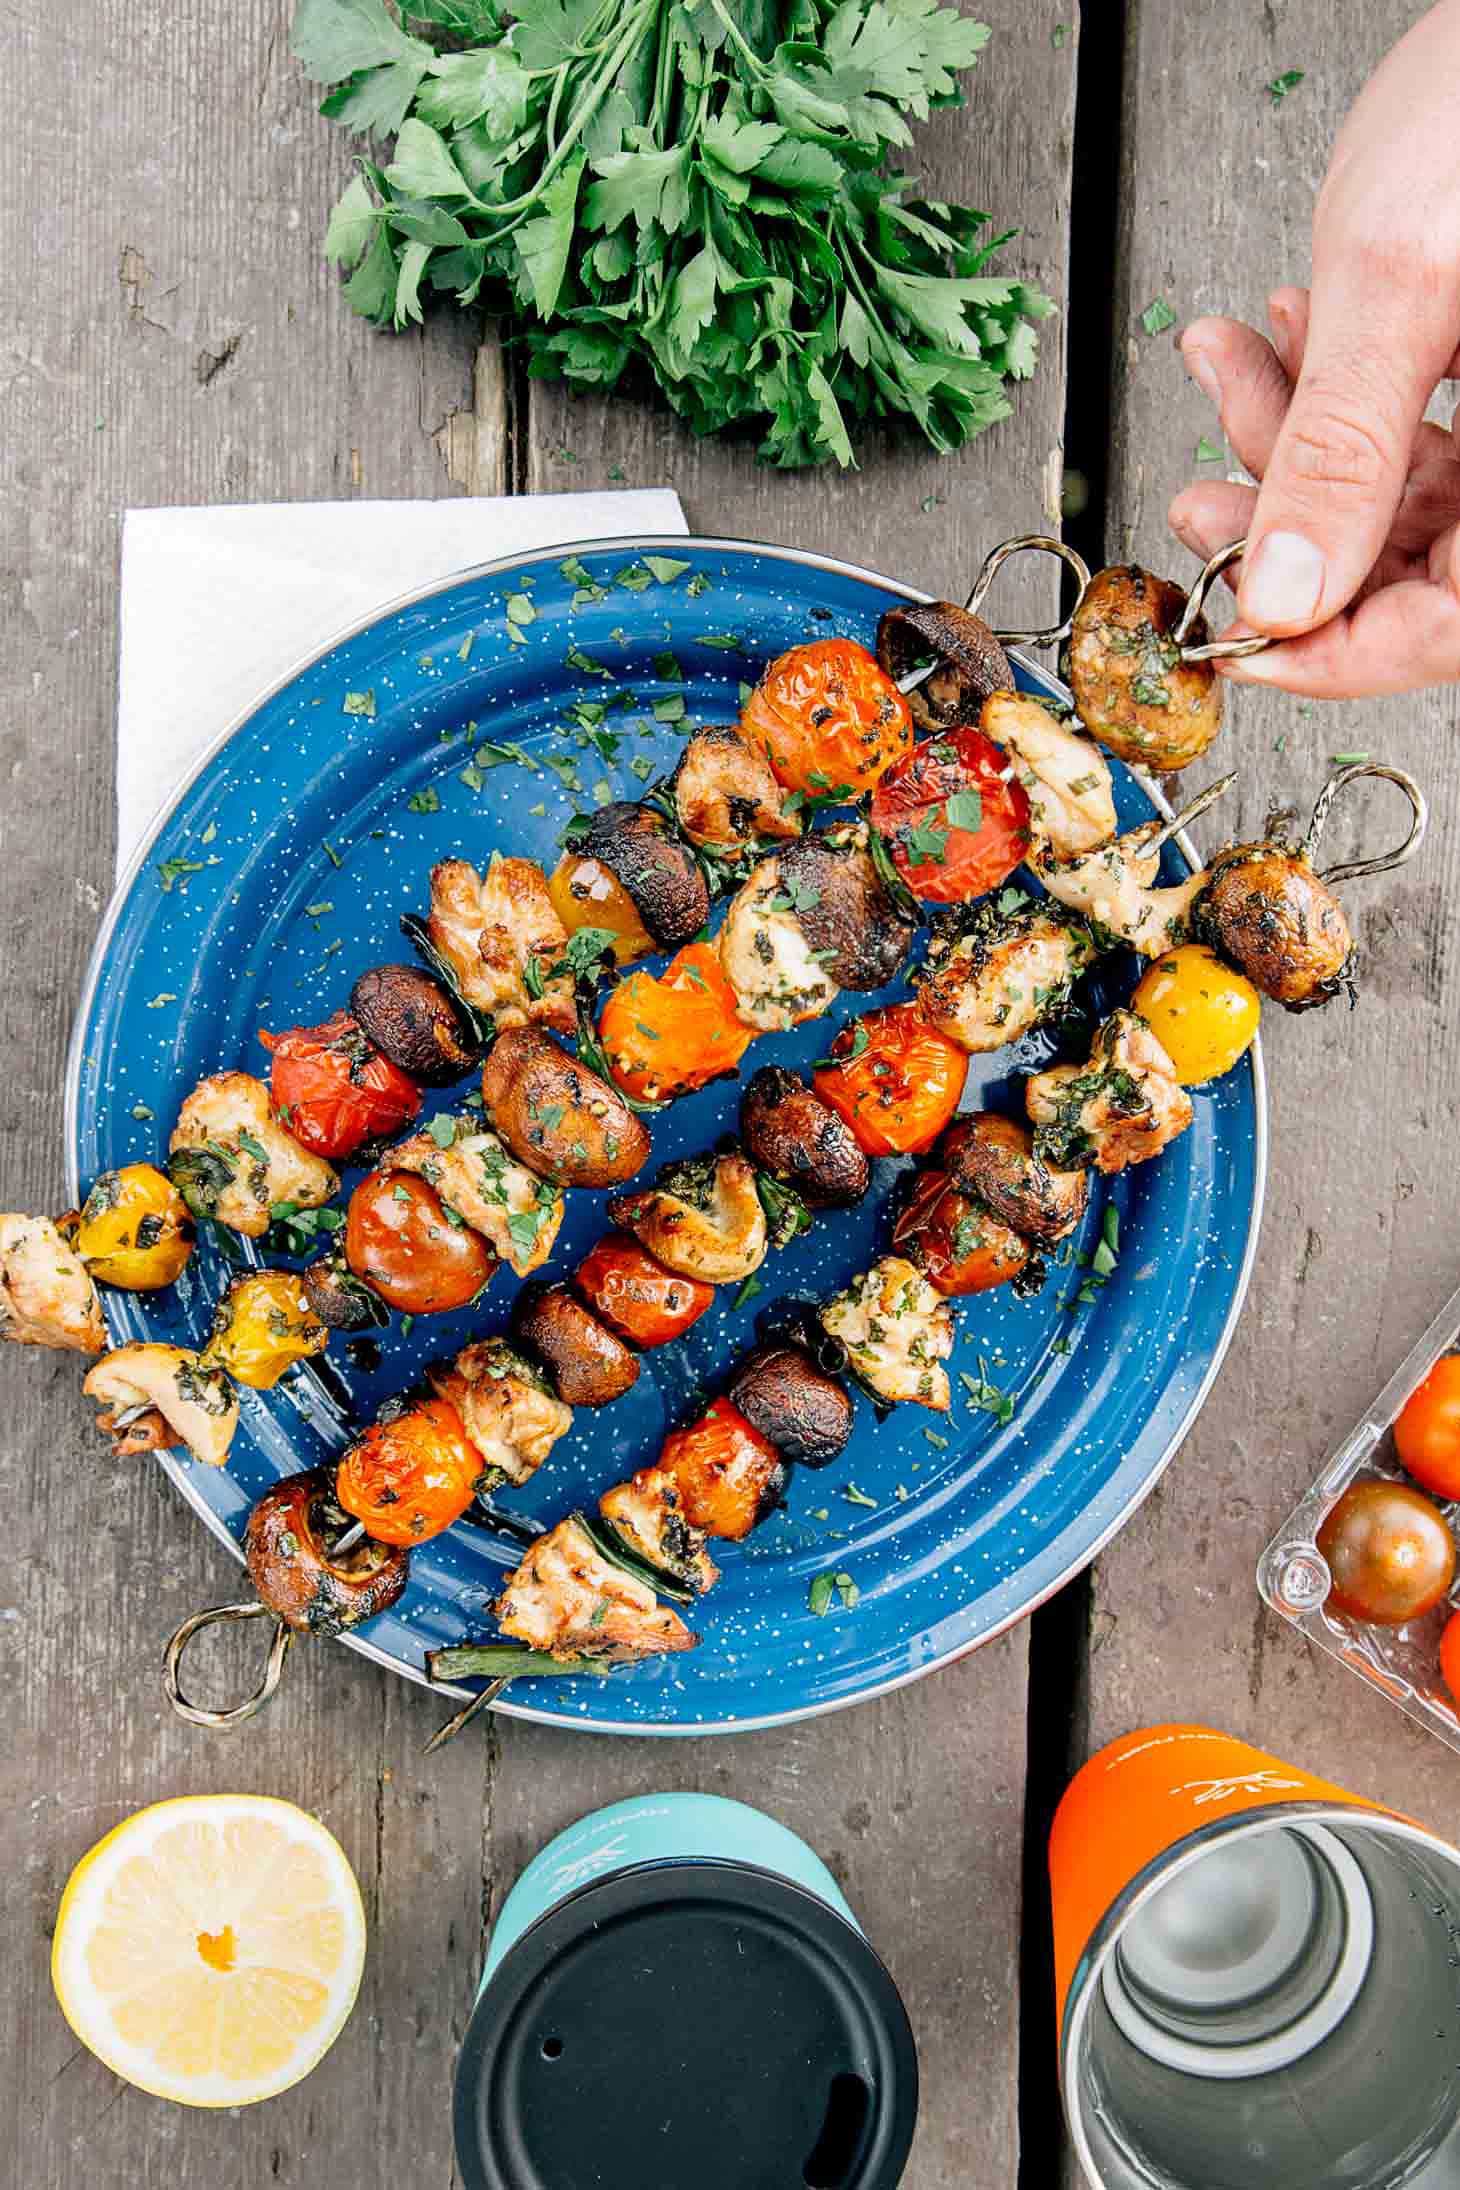 Grilled veggie & chicken skewers on a blue camping plate.